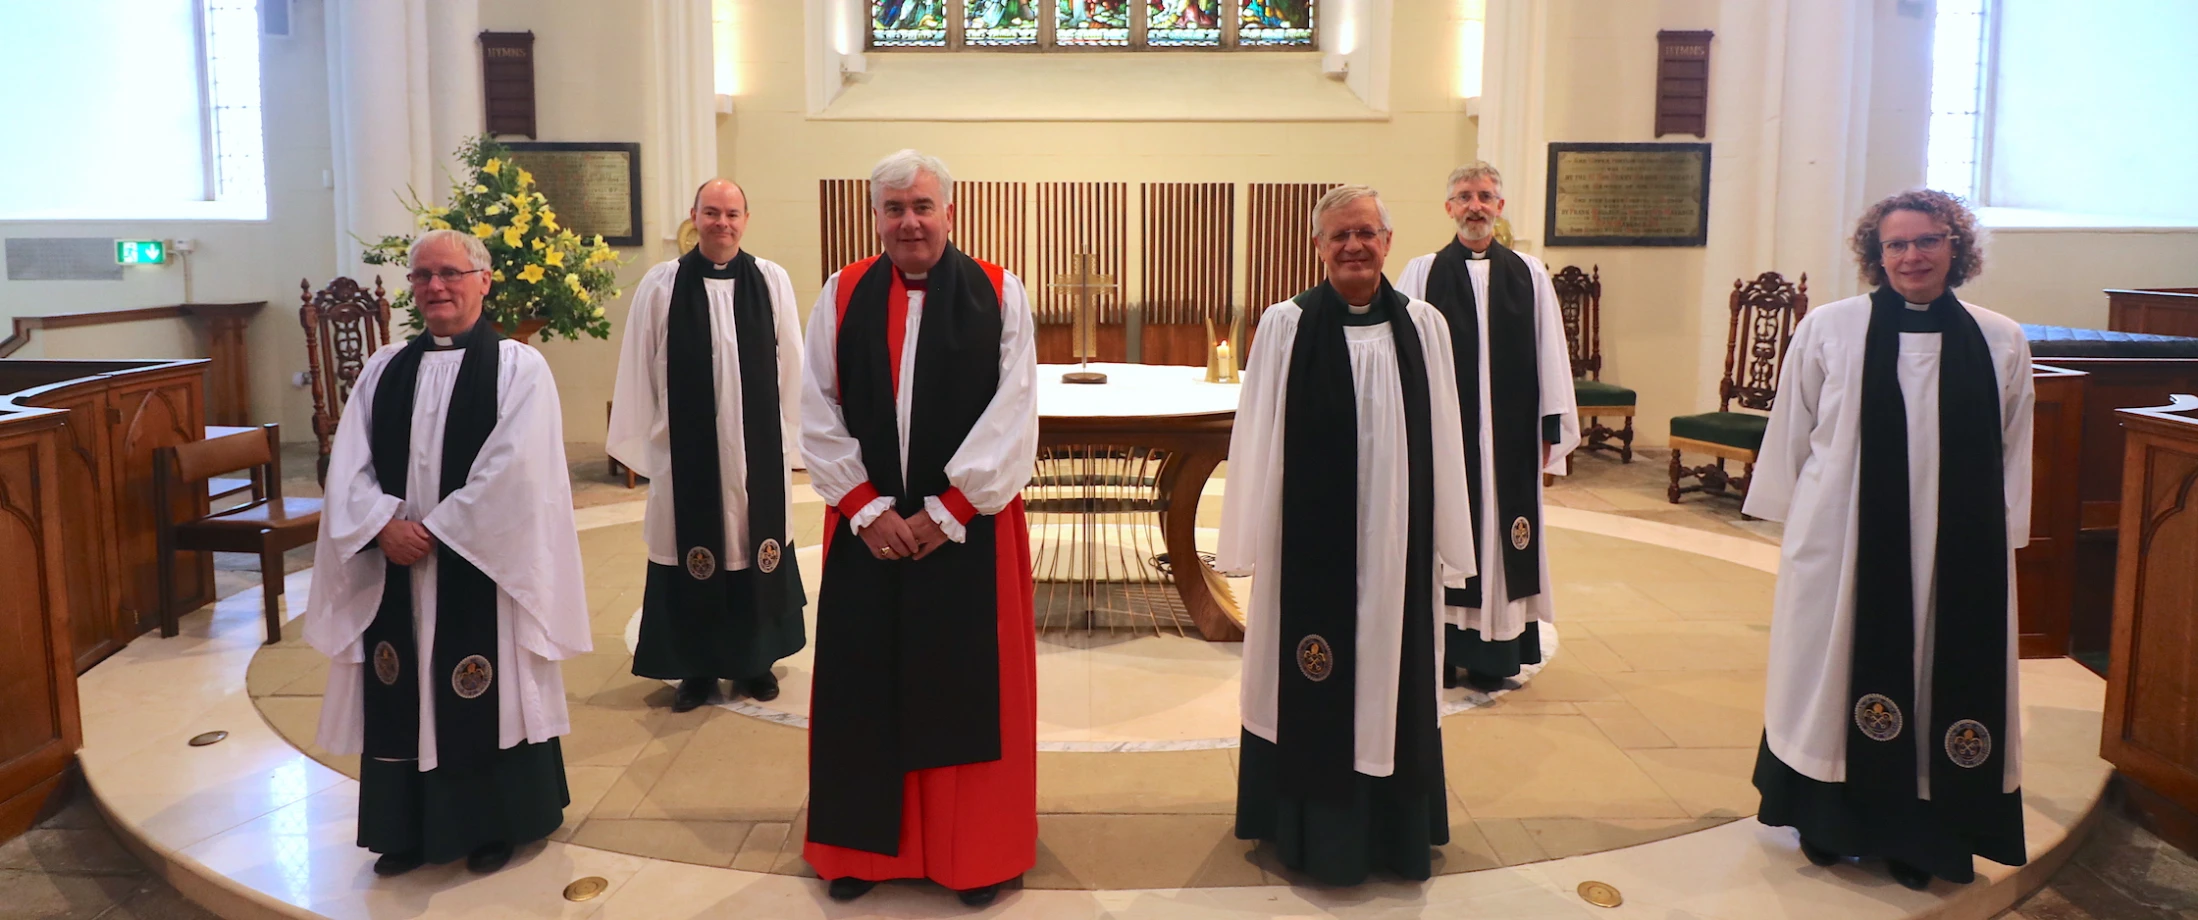 Archdeacon and Canons Installed in Down Cathedral